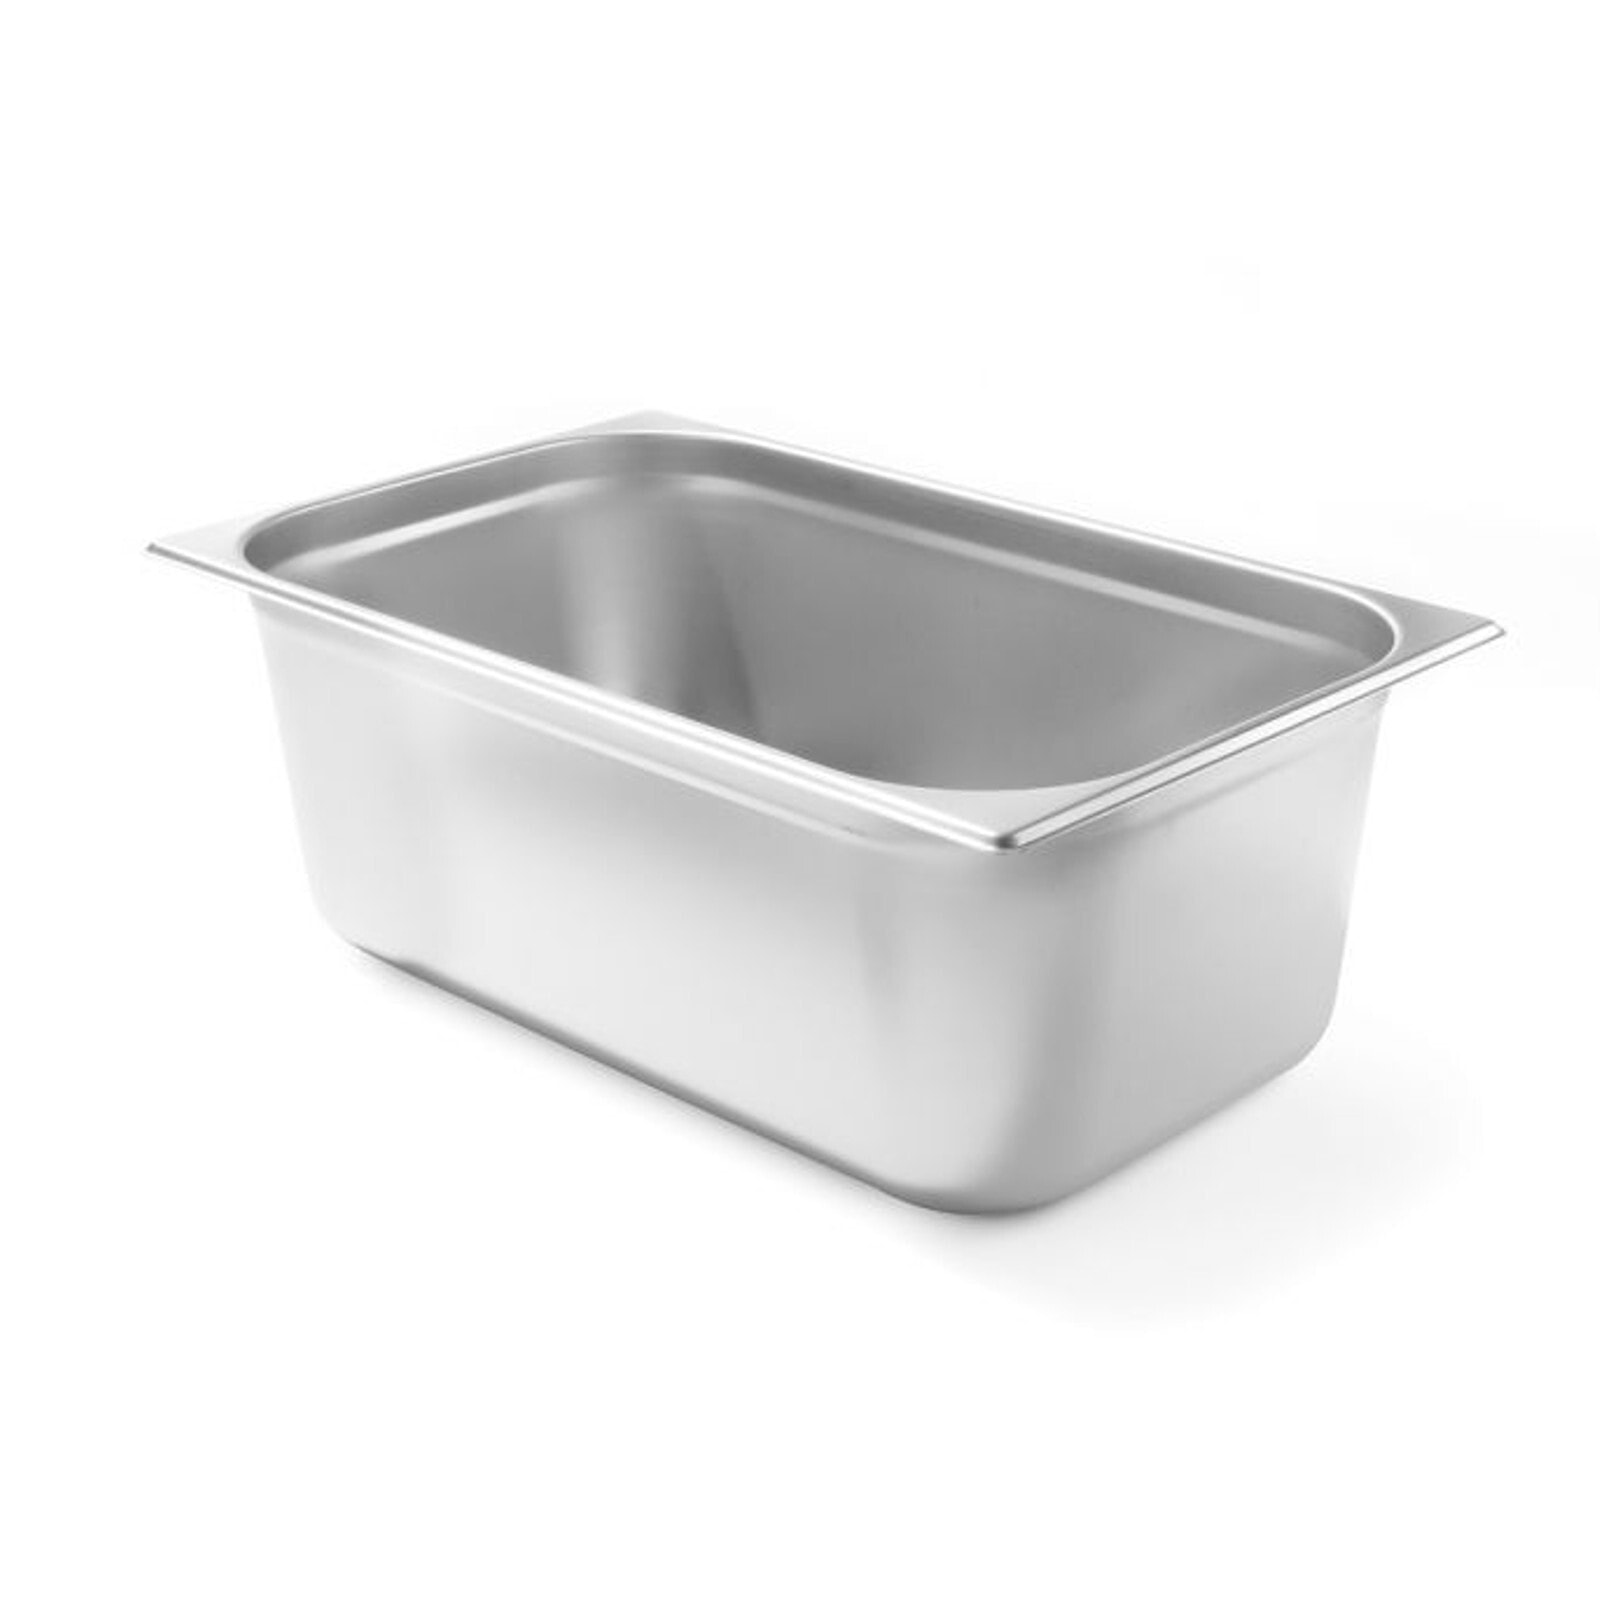 GN container 1/2, height 150 mm, made of stainless steel - Hendi 800348